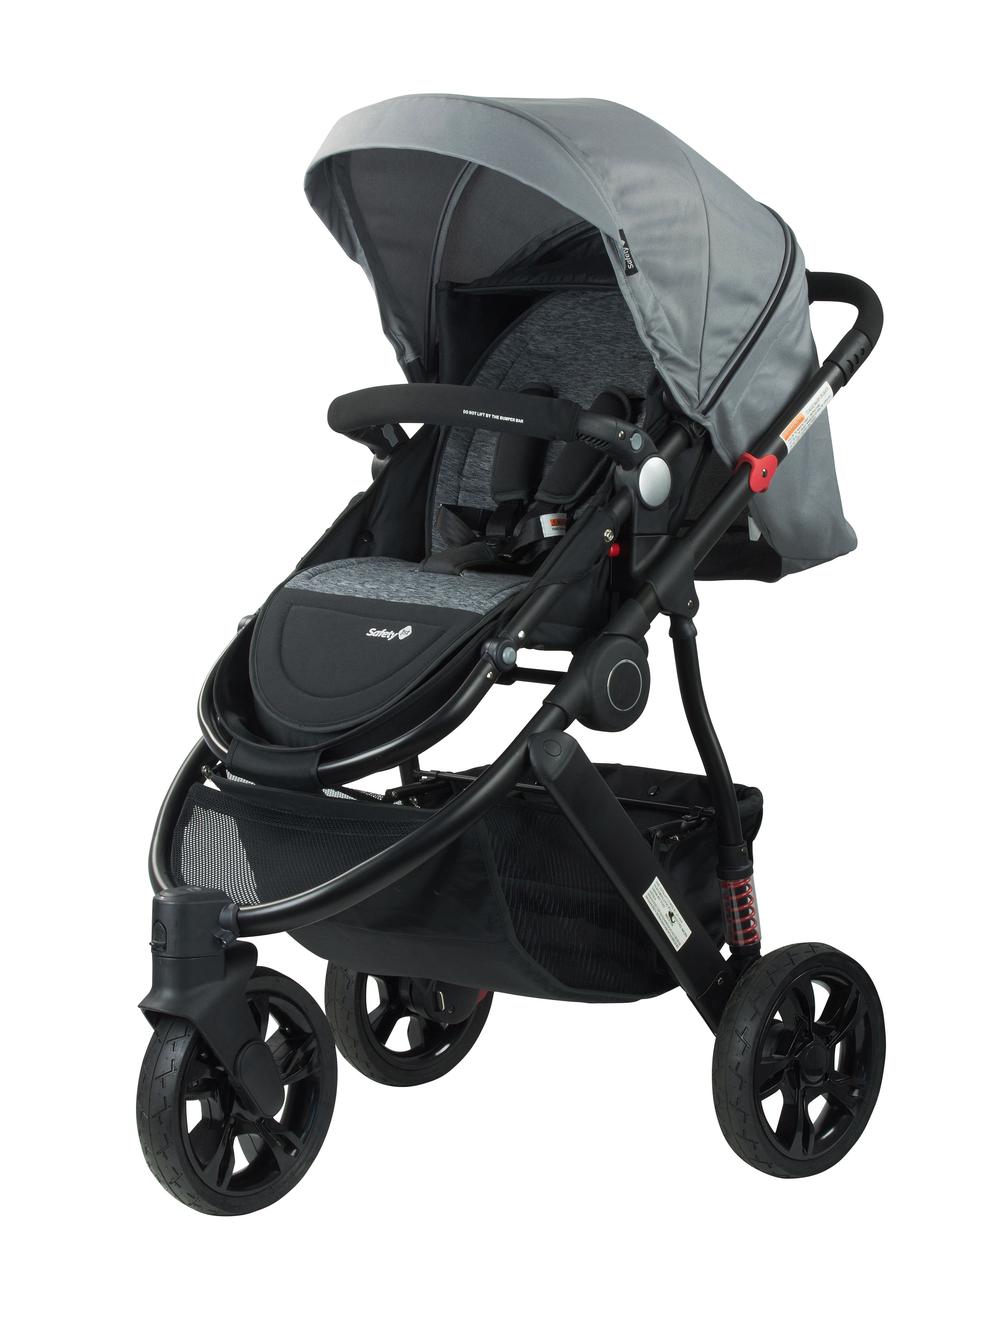 unicorn stroller and carseat